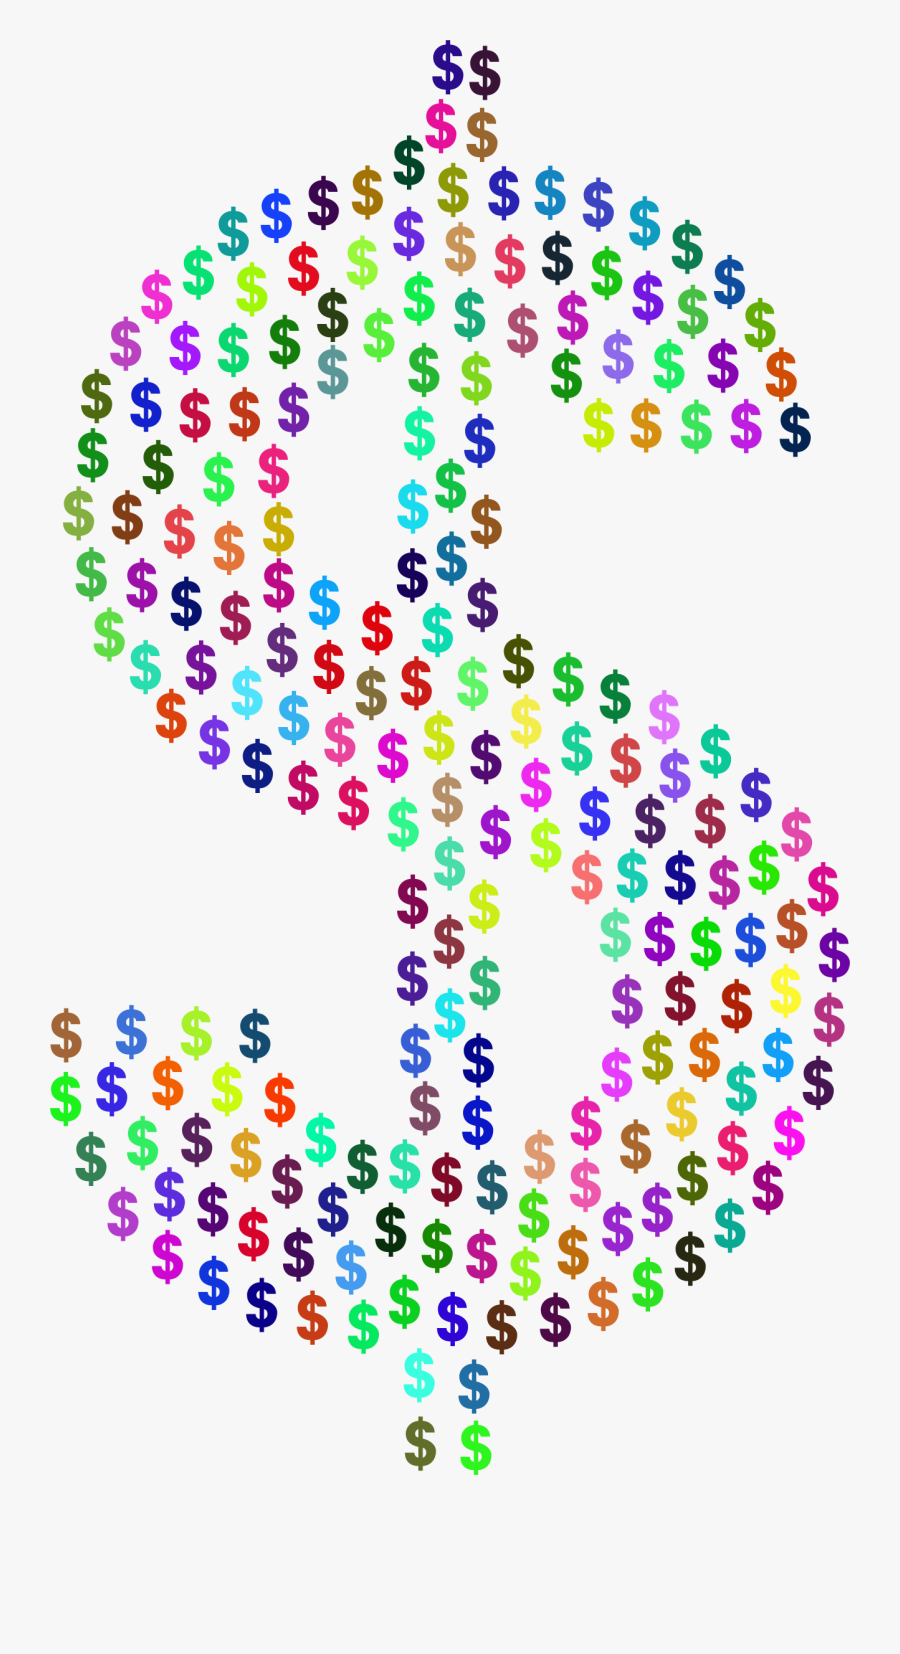 Dollar Sign Fractal Money Free Picture - Colorful Dollar Sign Transparent, Transparent Clipart